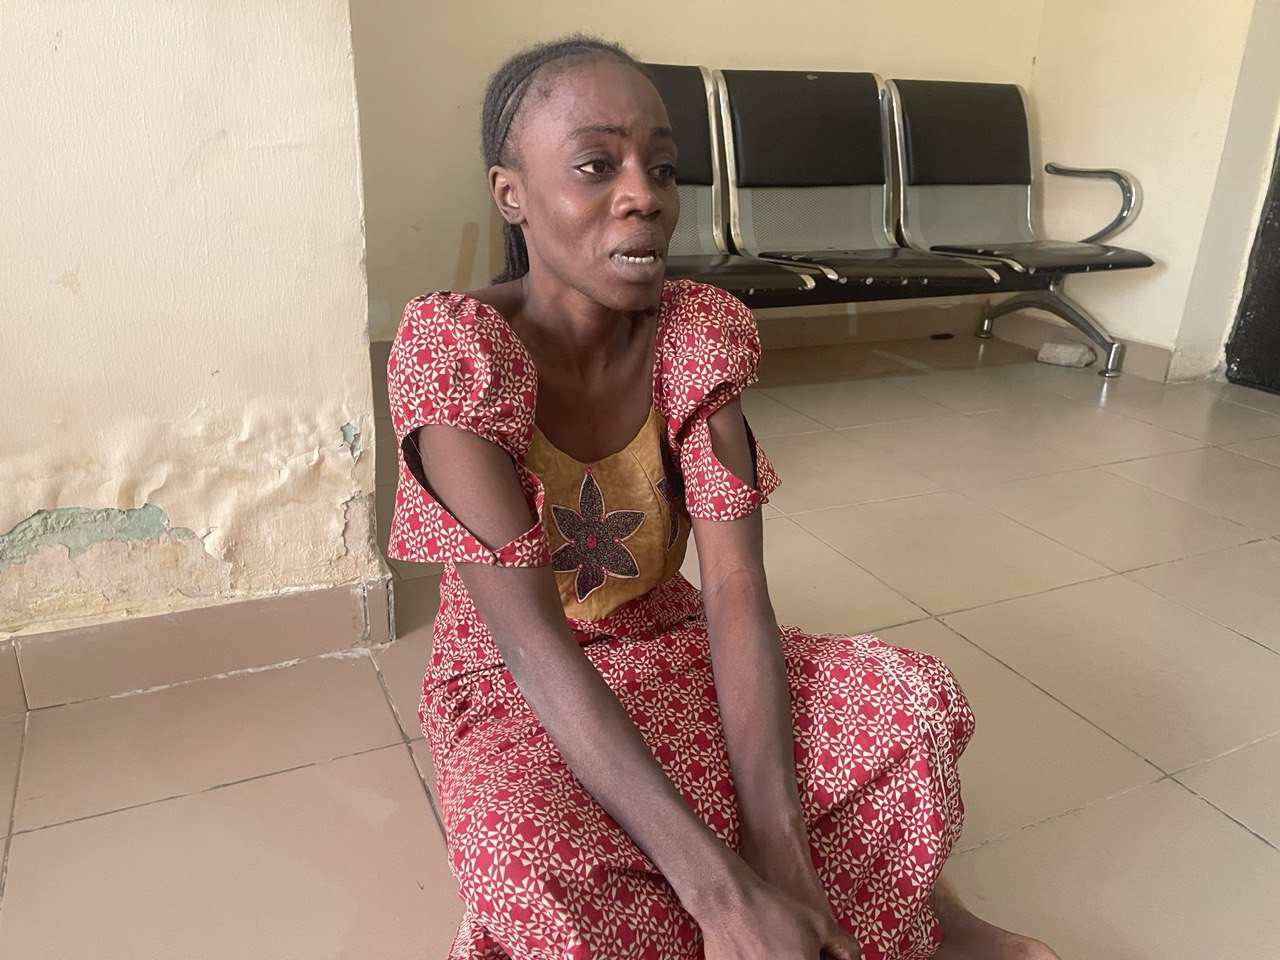 "I hate marriage, it pisses me off" — 25-year-old housewife says as she confesses to murder of husband in Borno 